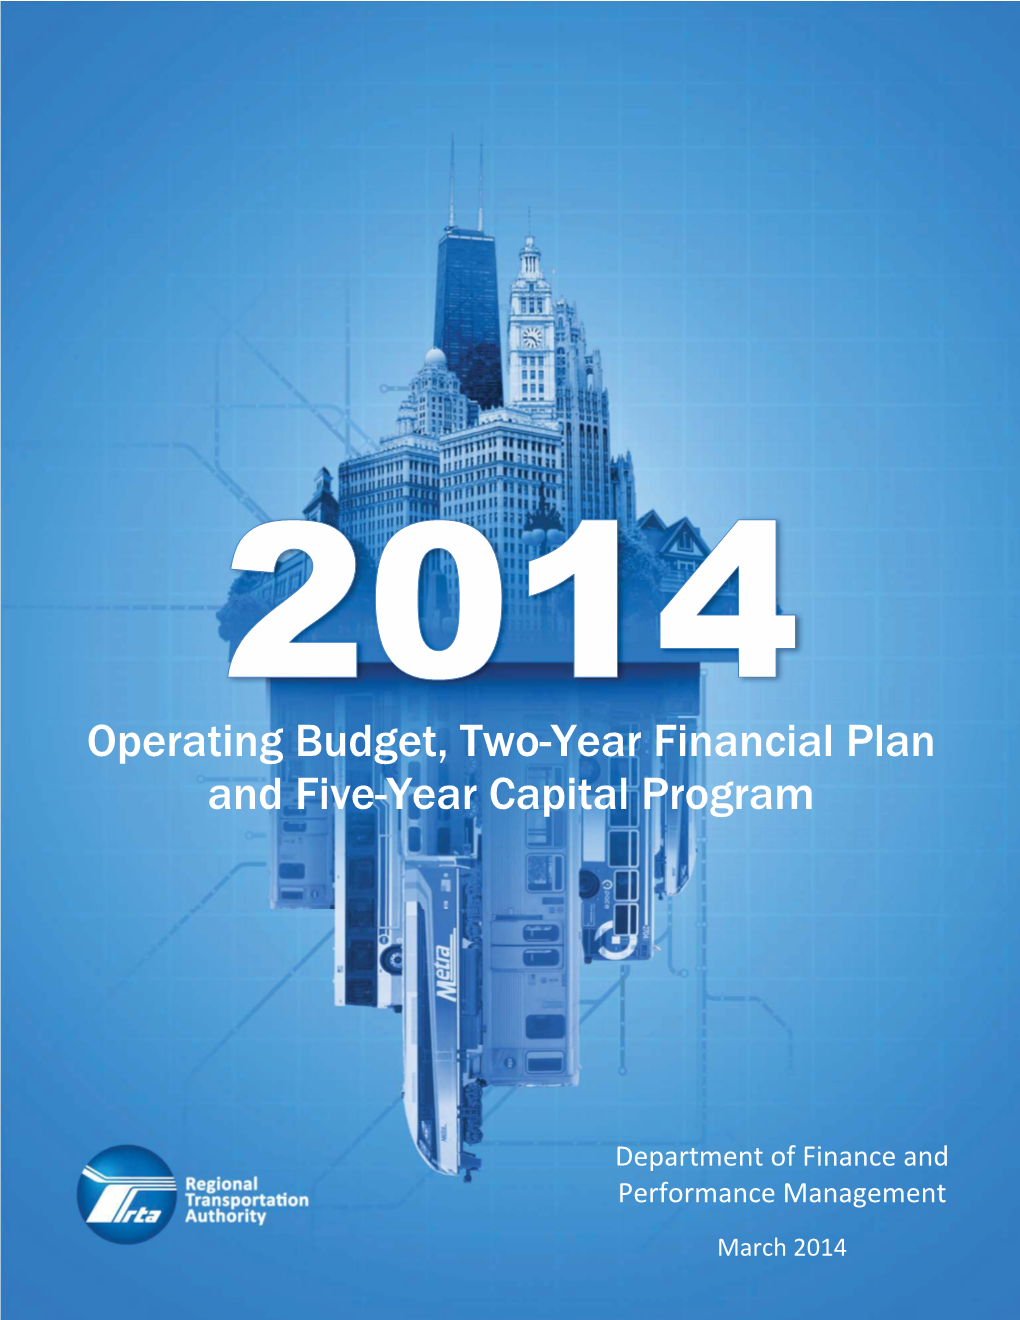 Two-Year Financial Plan and Five-Year Capital Program